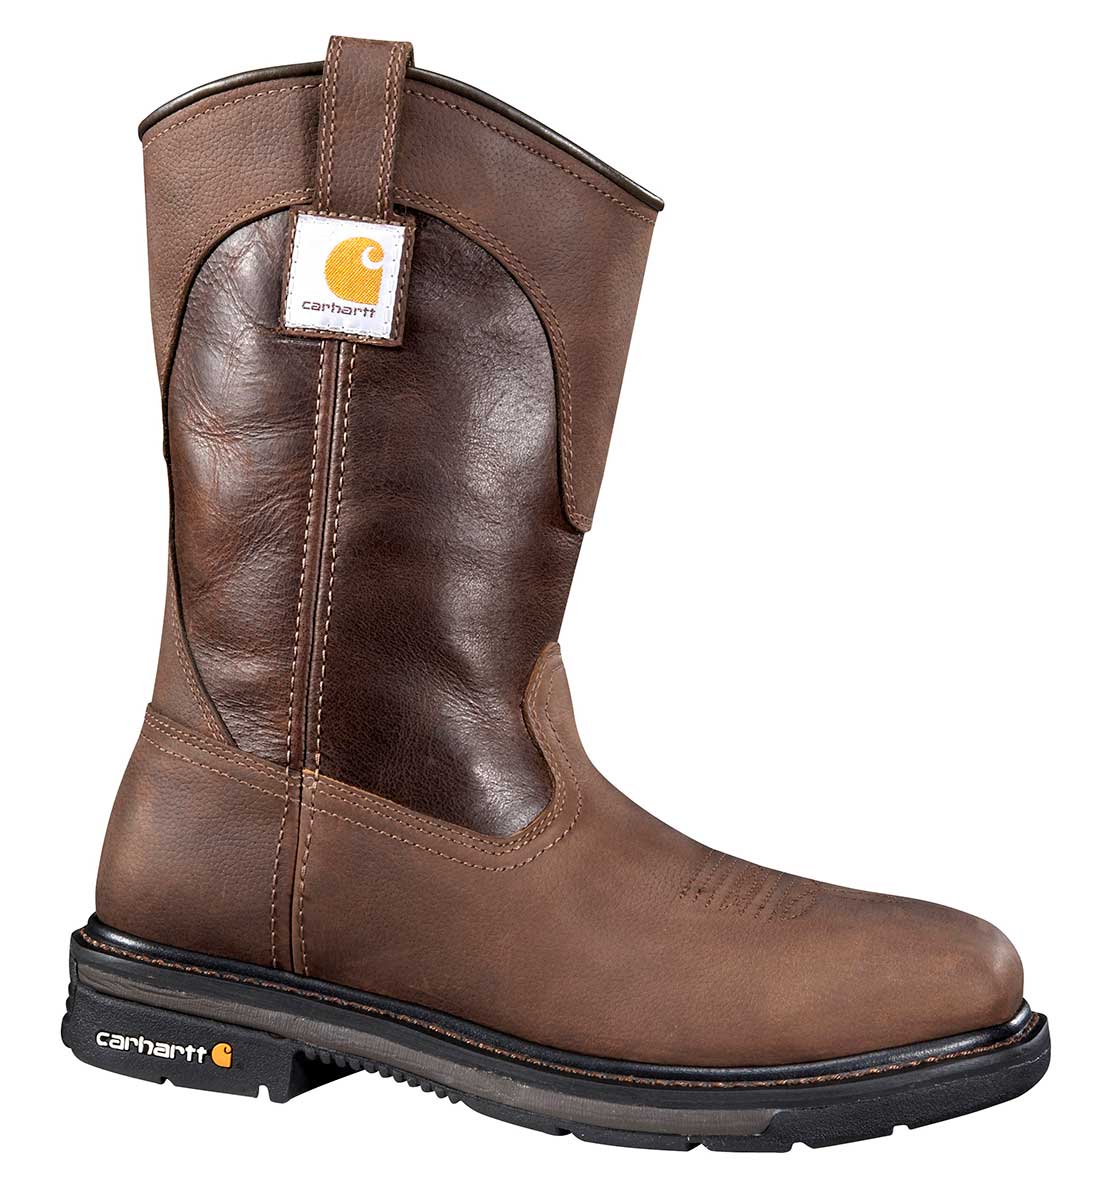 Carhartt - CMP1218 - Rugged Flex Square Toe Men's Two Tone Brn Leather NWP Steel Safety Toe 11 Wellington Work Boot